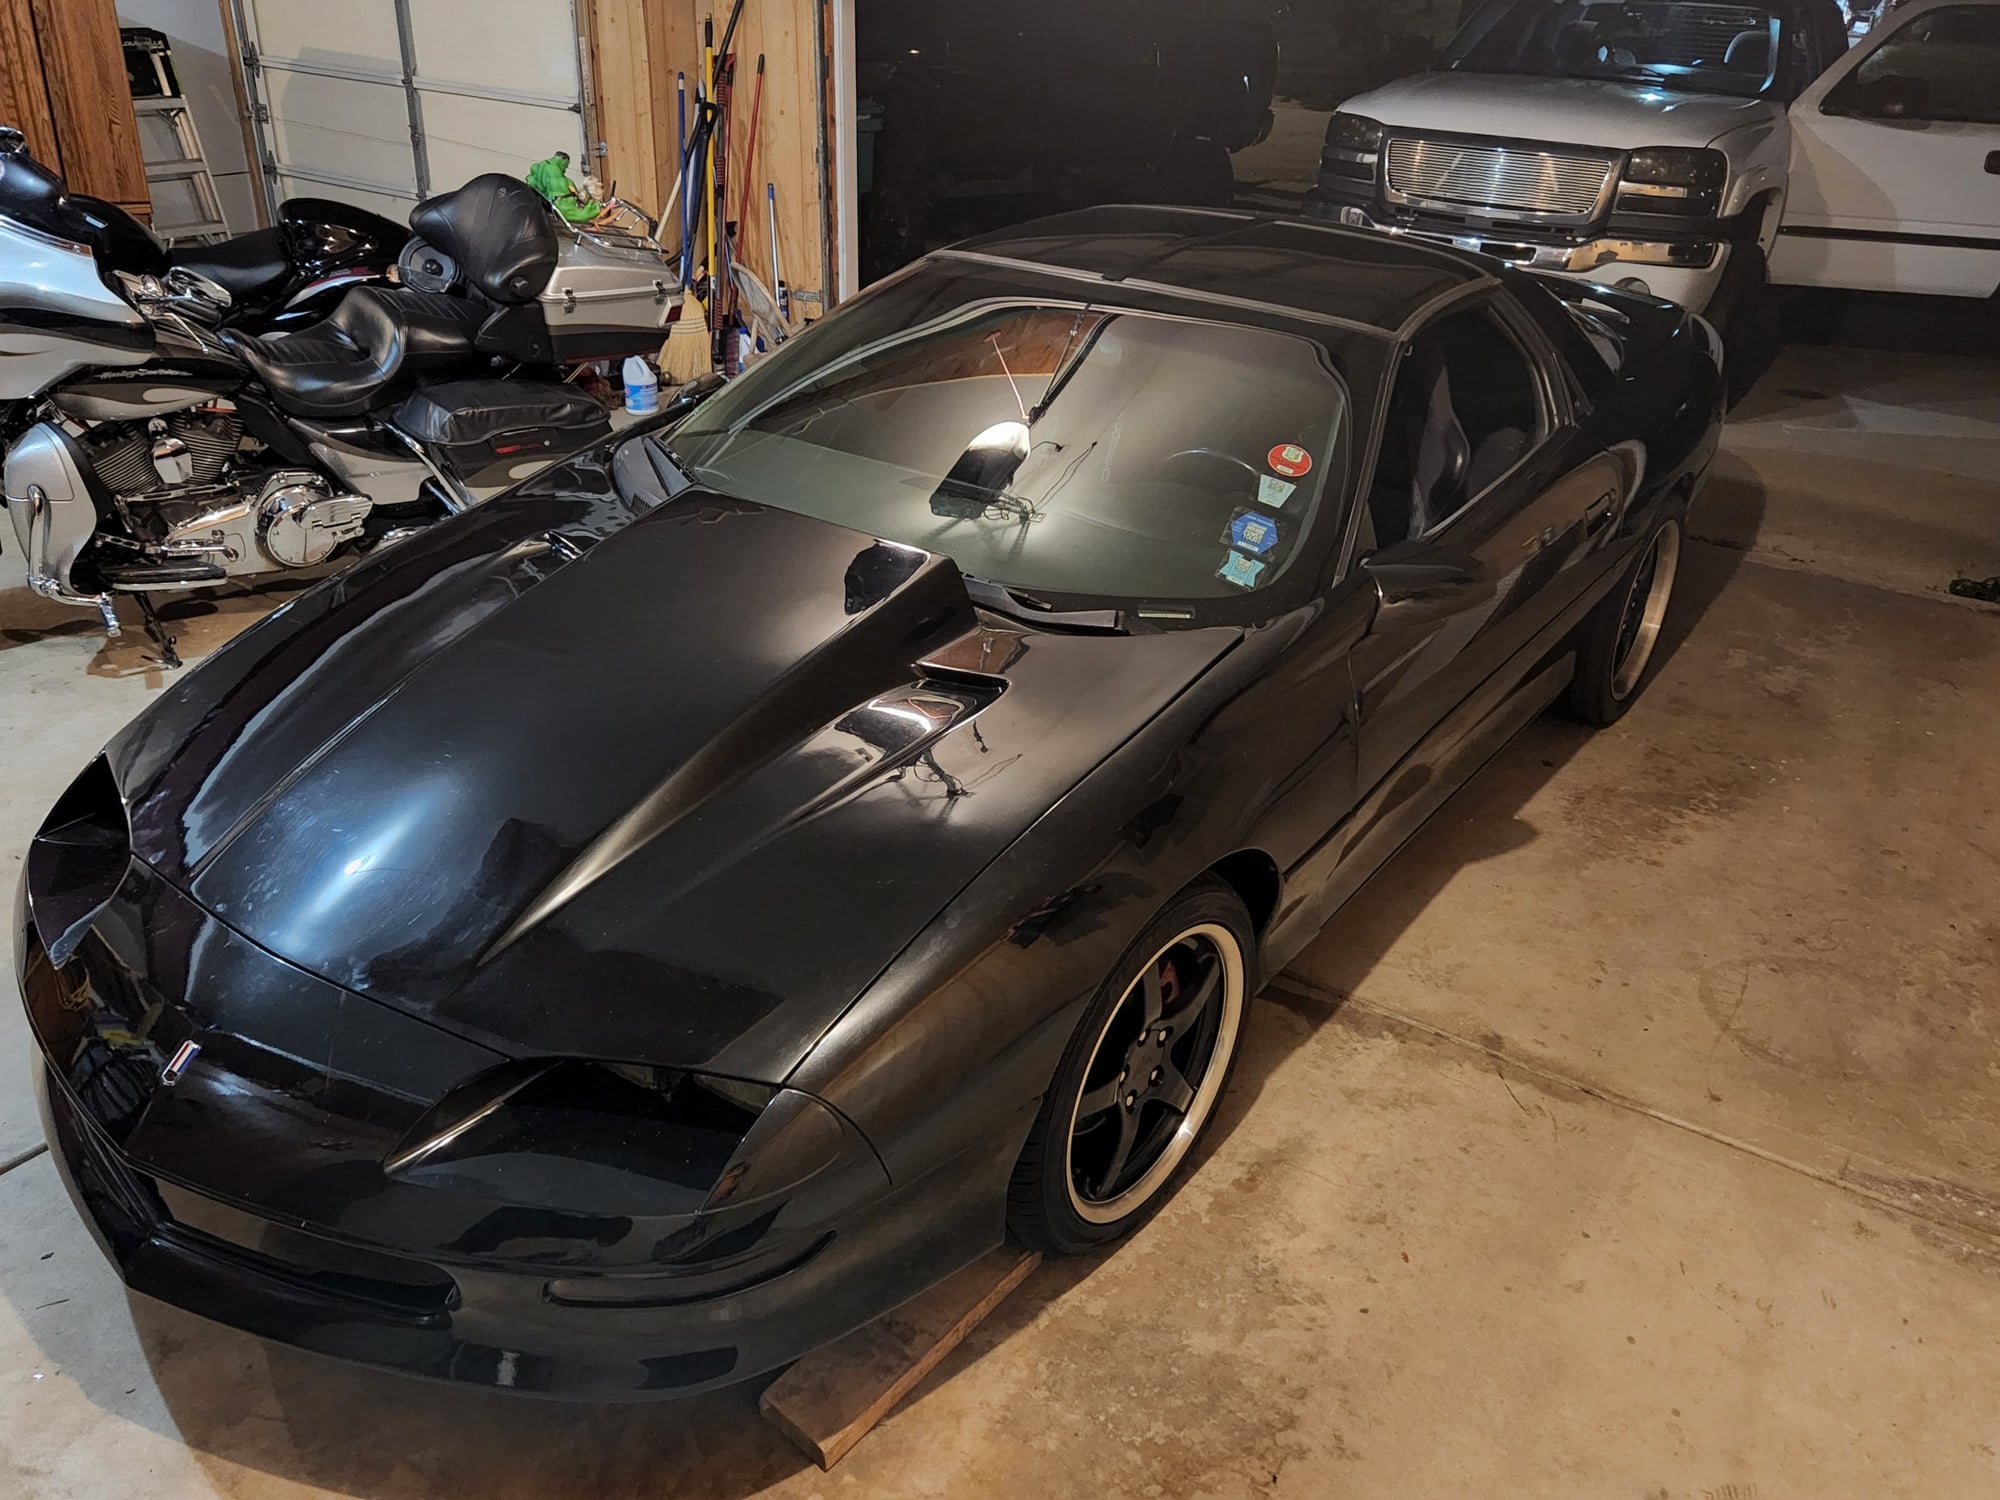 2004 Chevrolet Classic - Supercharged z28,lots of mods - Used - VIN 2g1fp22p4r2129312 - 80,000 Miles - 8 cyl - Manual - Coupe - Black - Joliet, IL 60435, United States